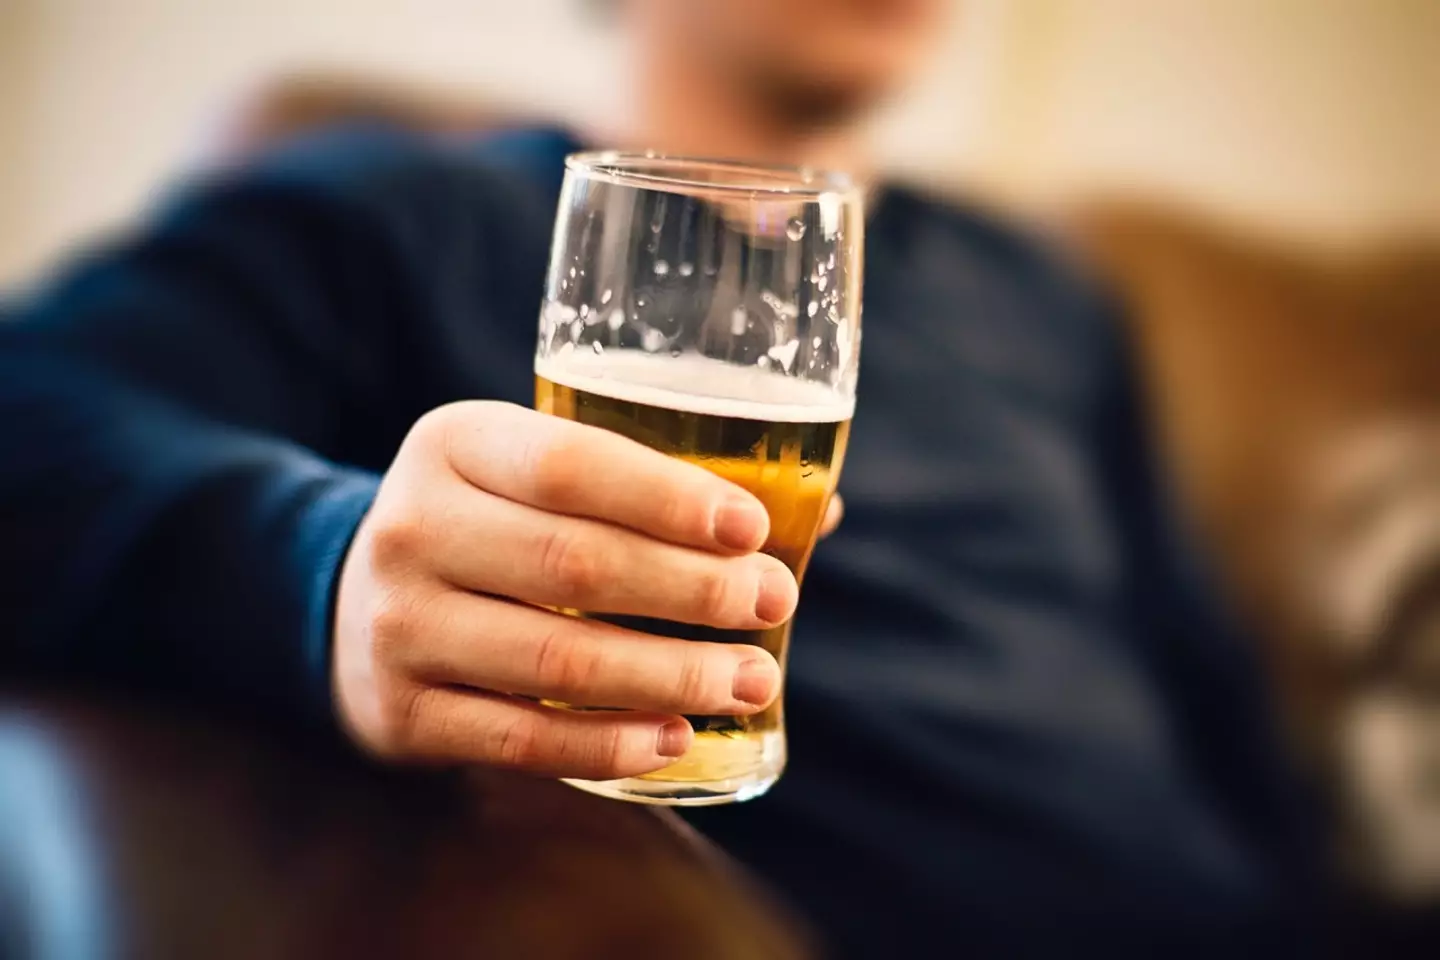 Dry January started in 2013 with just 4,000 people.